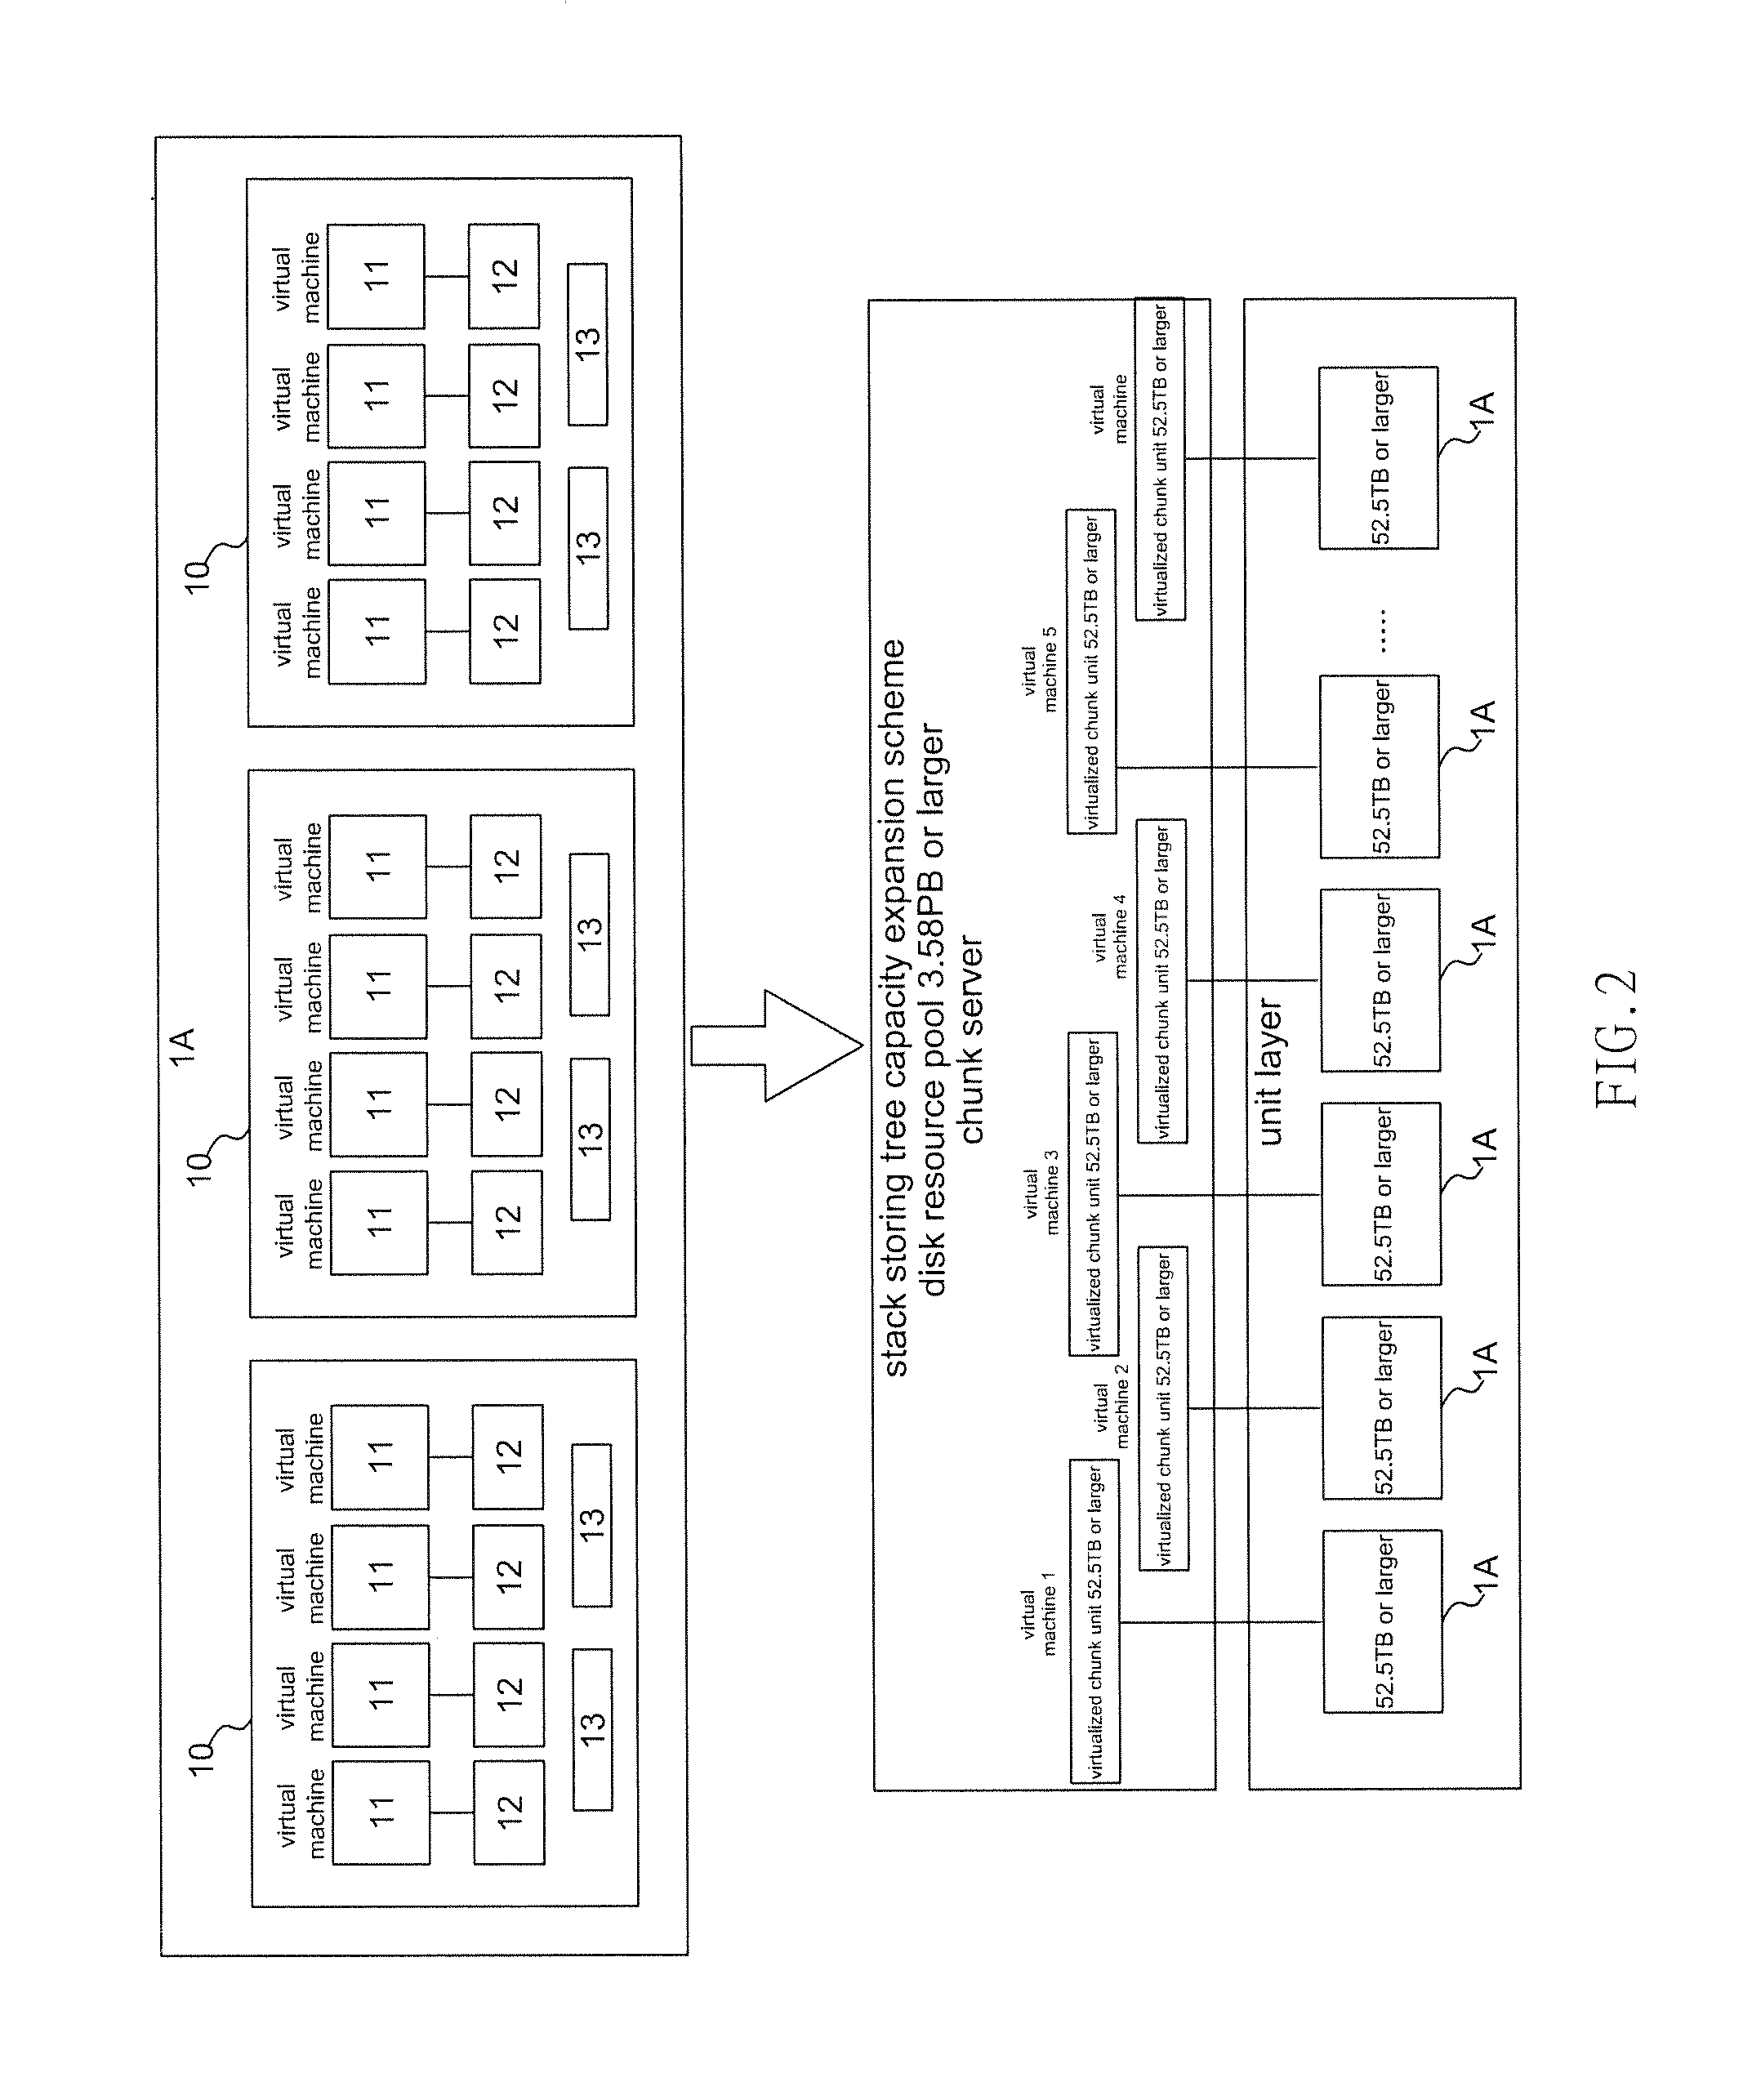 Operation method of distributed memory disk cluster storage system